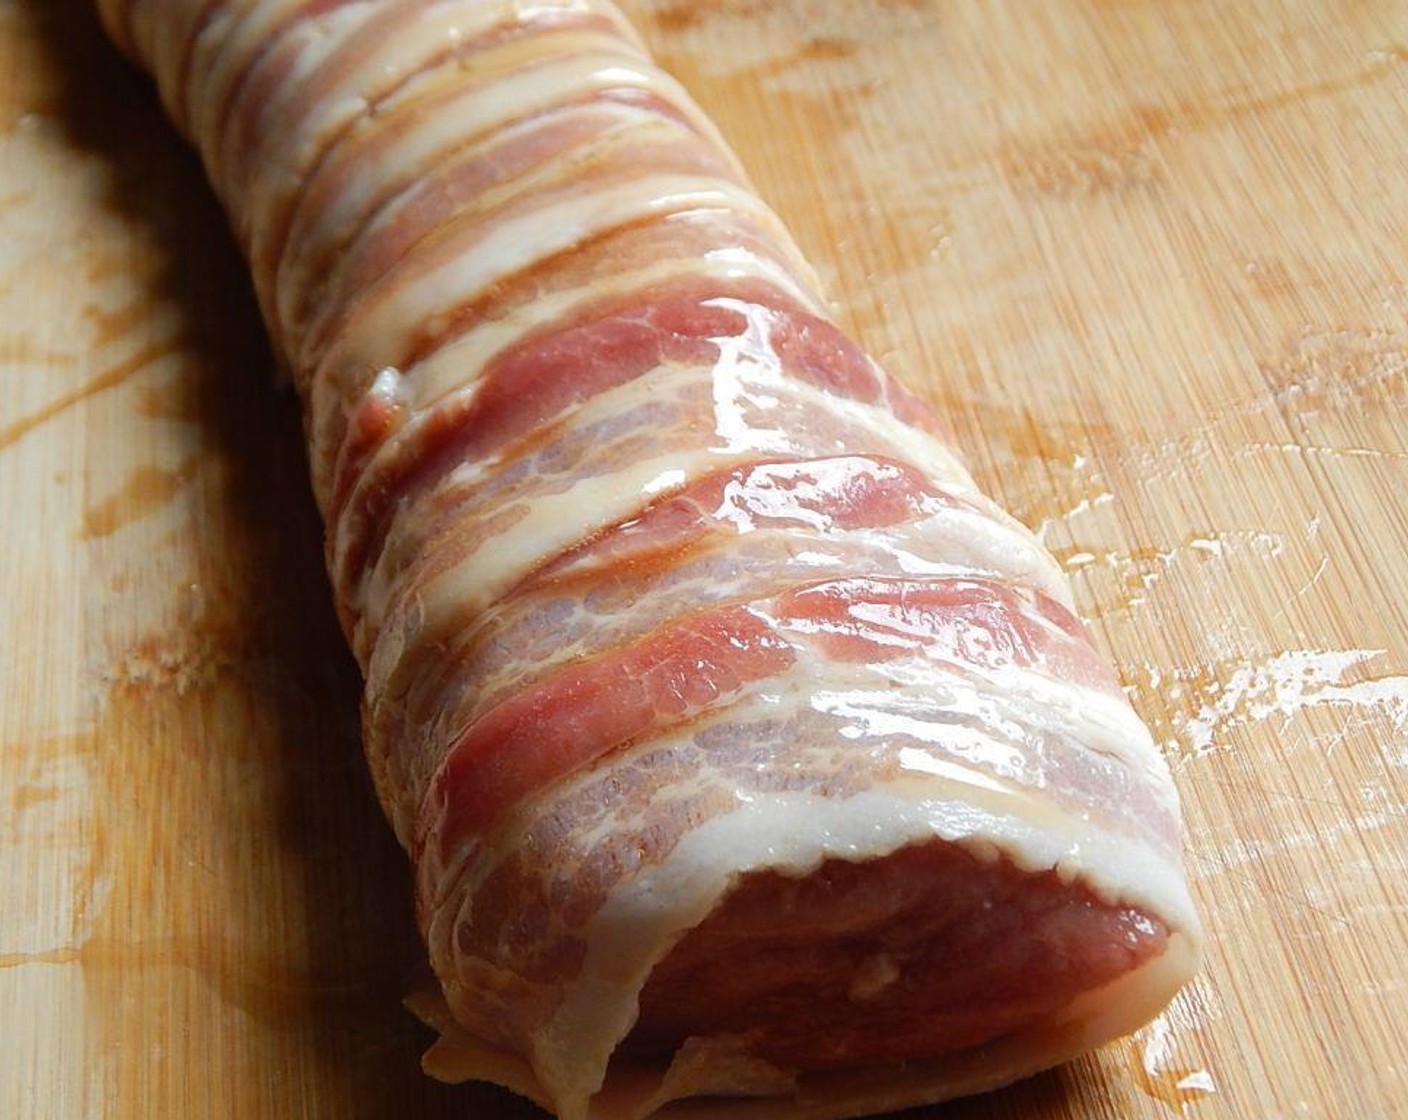 step 2 Starting from one end wrap your Bacon (8 slices) around the Pork Tenderloin (1) as tightly as you can, trying to have the ends all on the bottom. Cover bacon in the remaining syrup mixture.